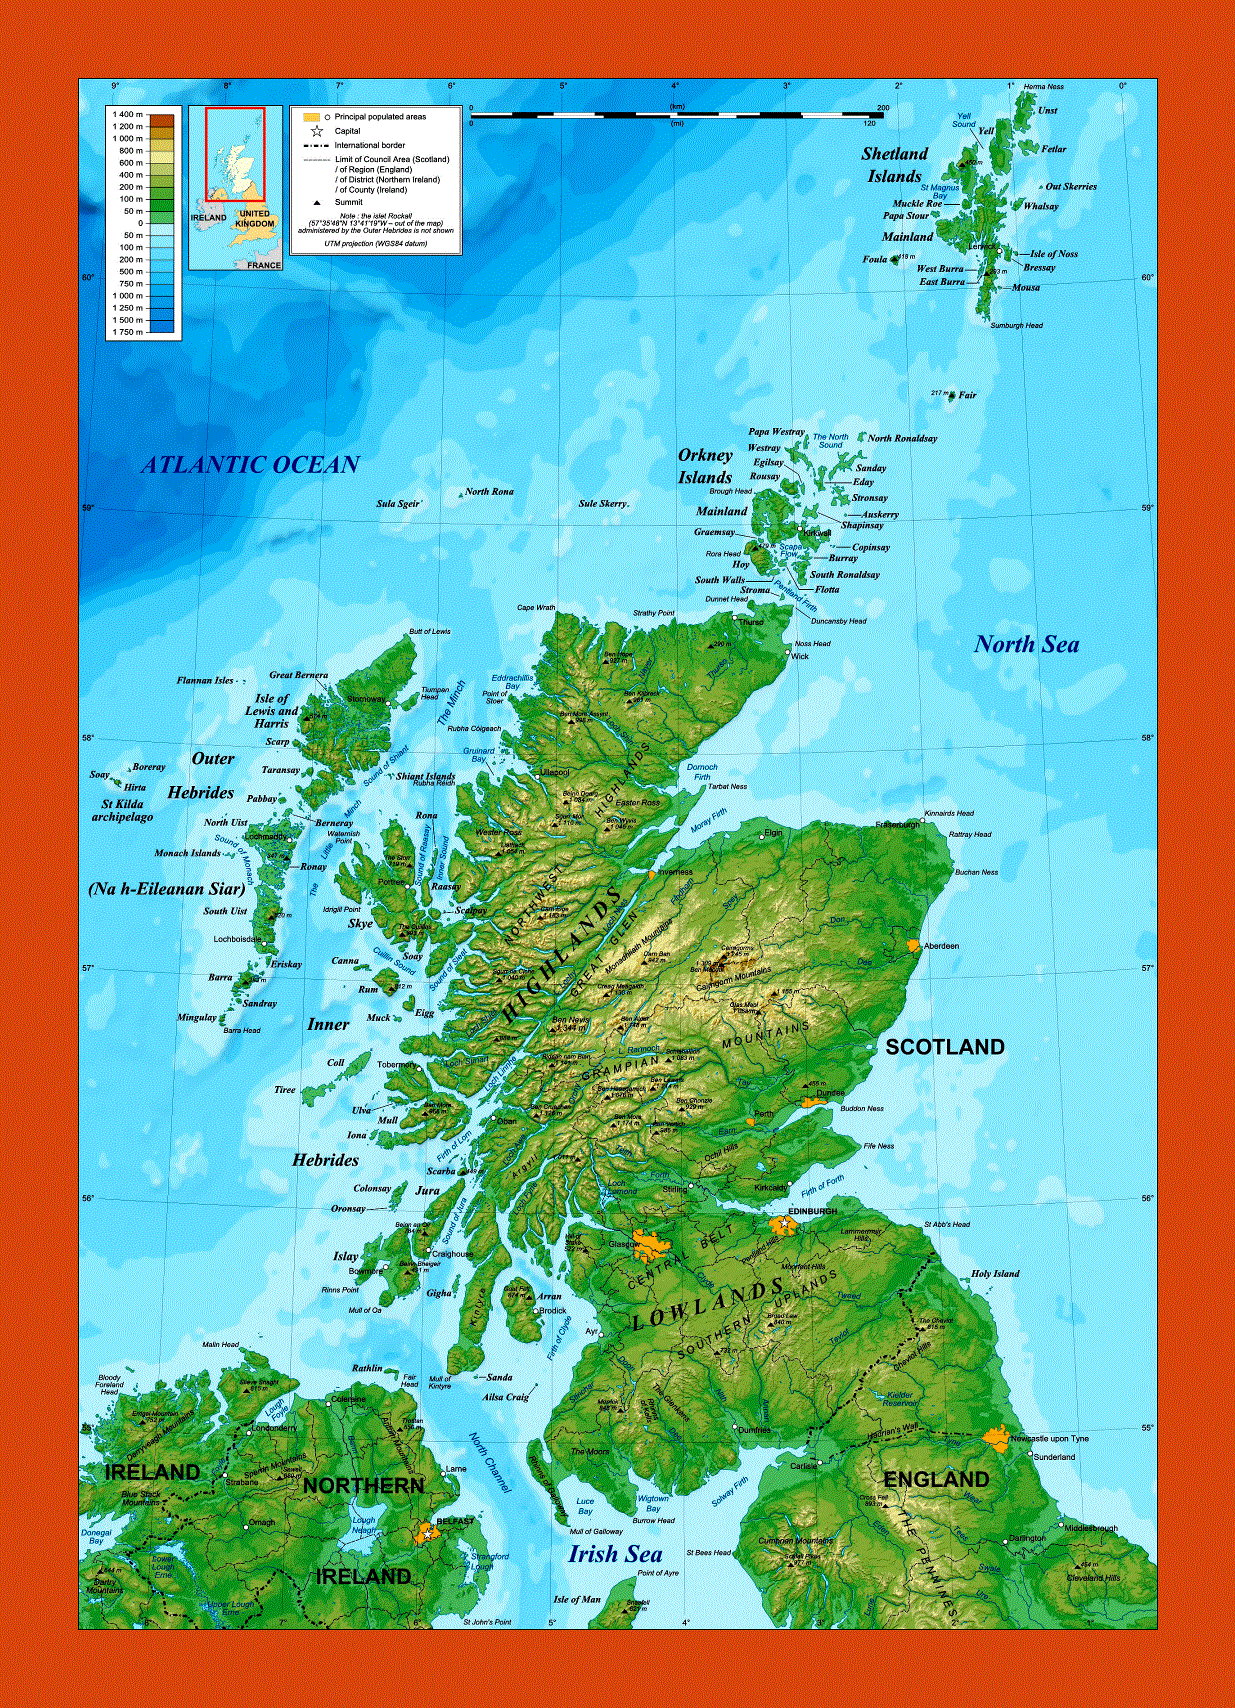 Topographical map of Scotland